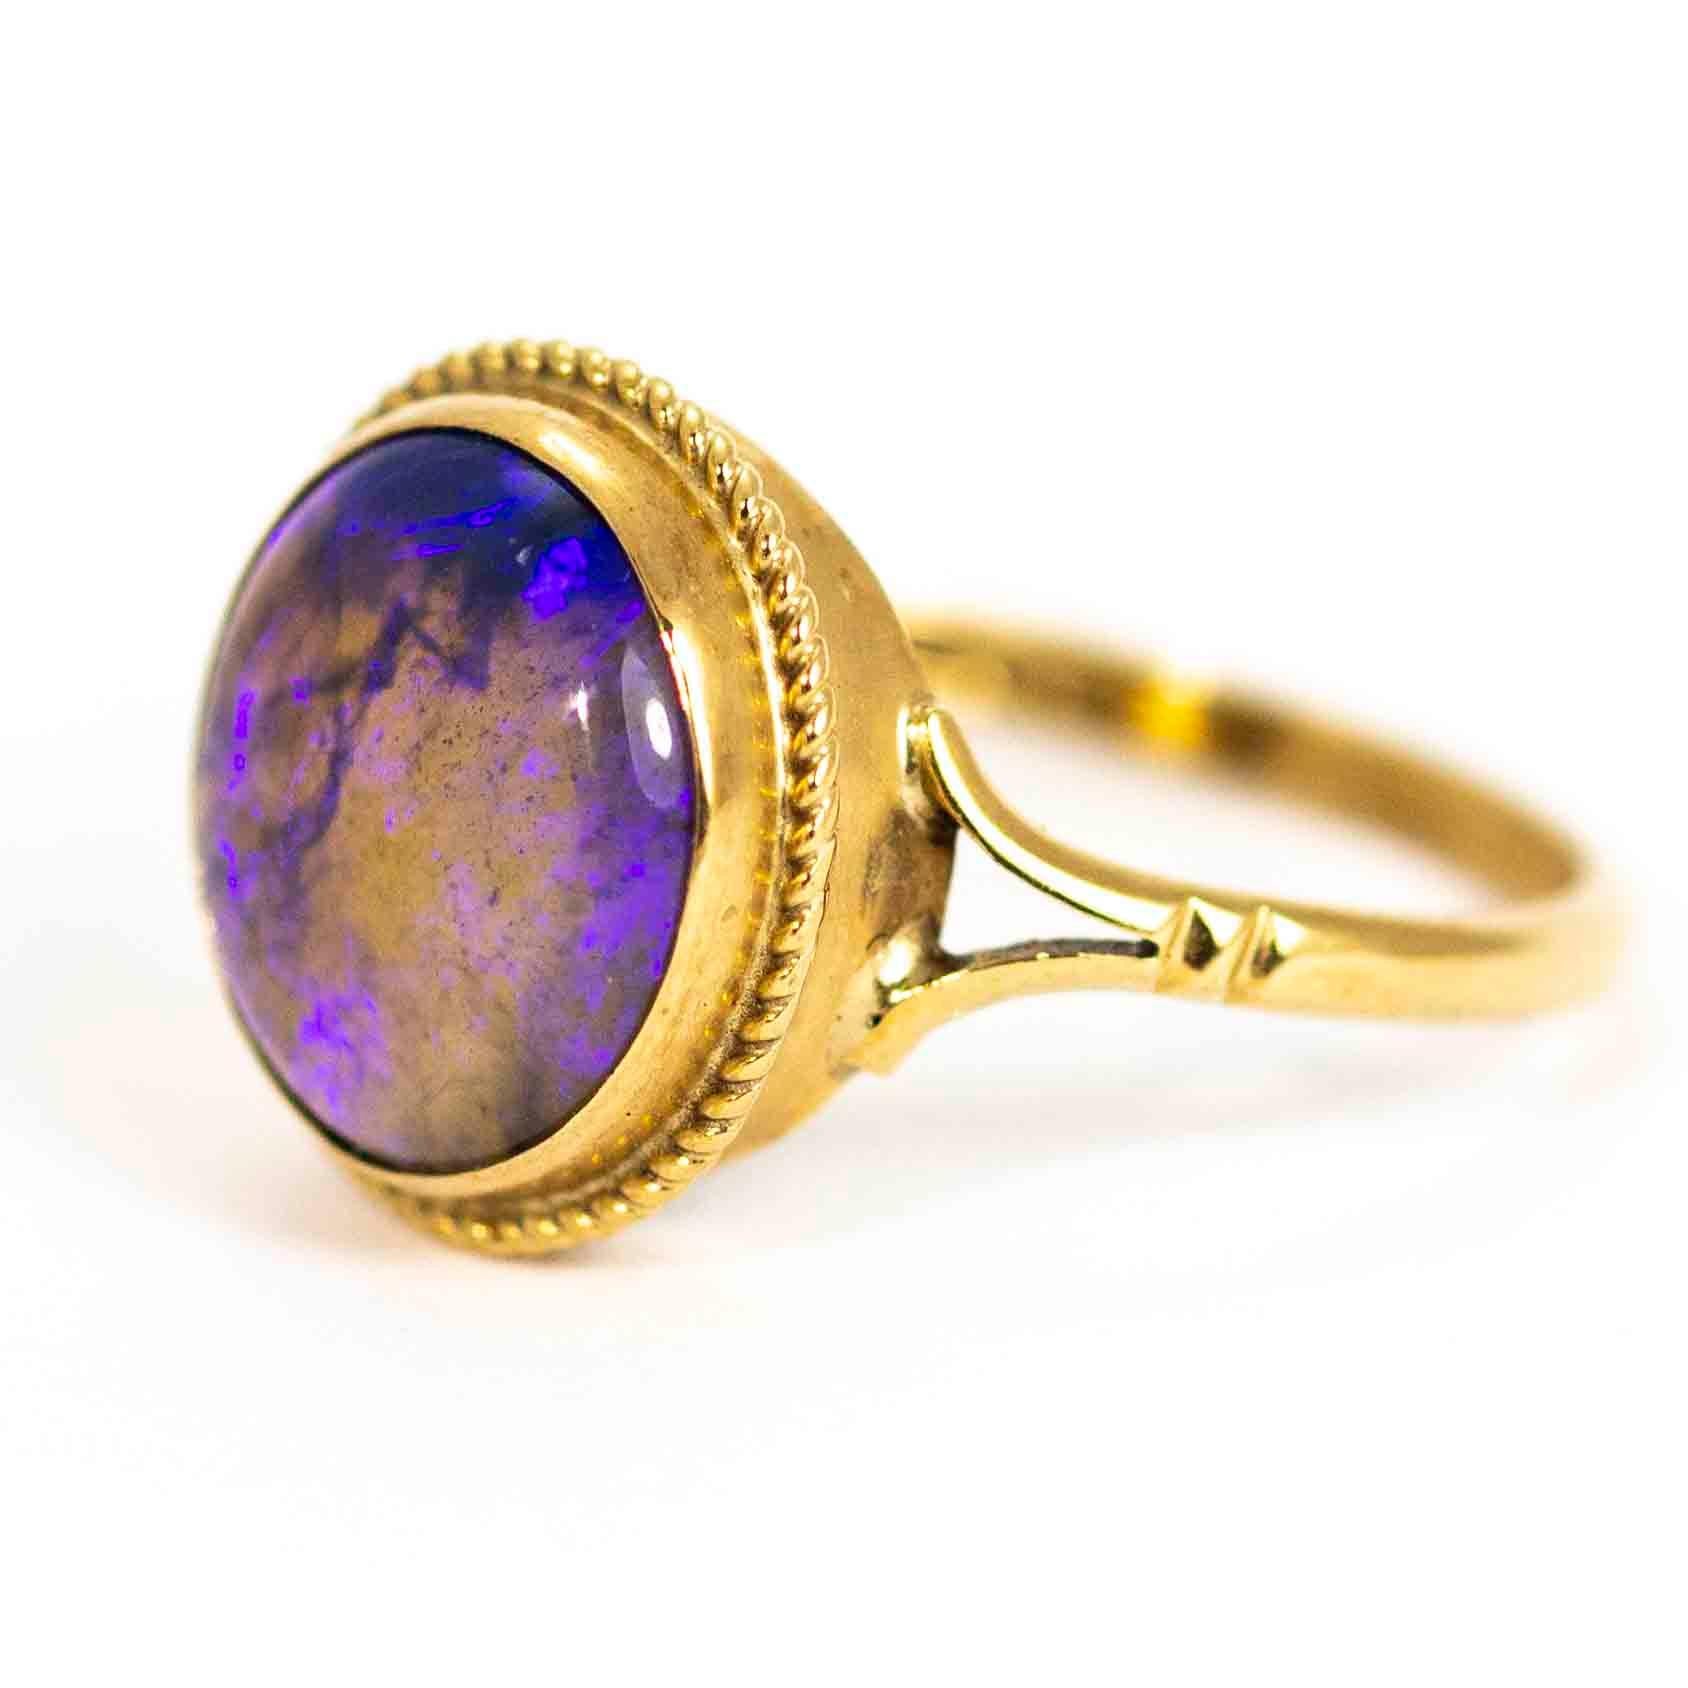 A stunning vintage ring set with a large round cabochon cut purple agate. The agate is superb, with a wonderful nebula of colours and sits between elegant spit shoulders. The stone setting is decorated with a fine twisted rope motif border. Modelled